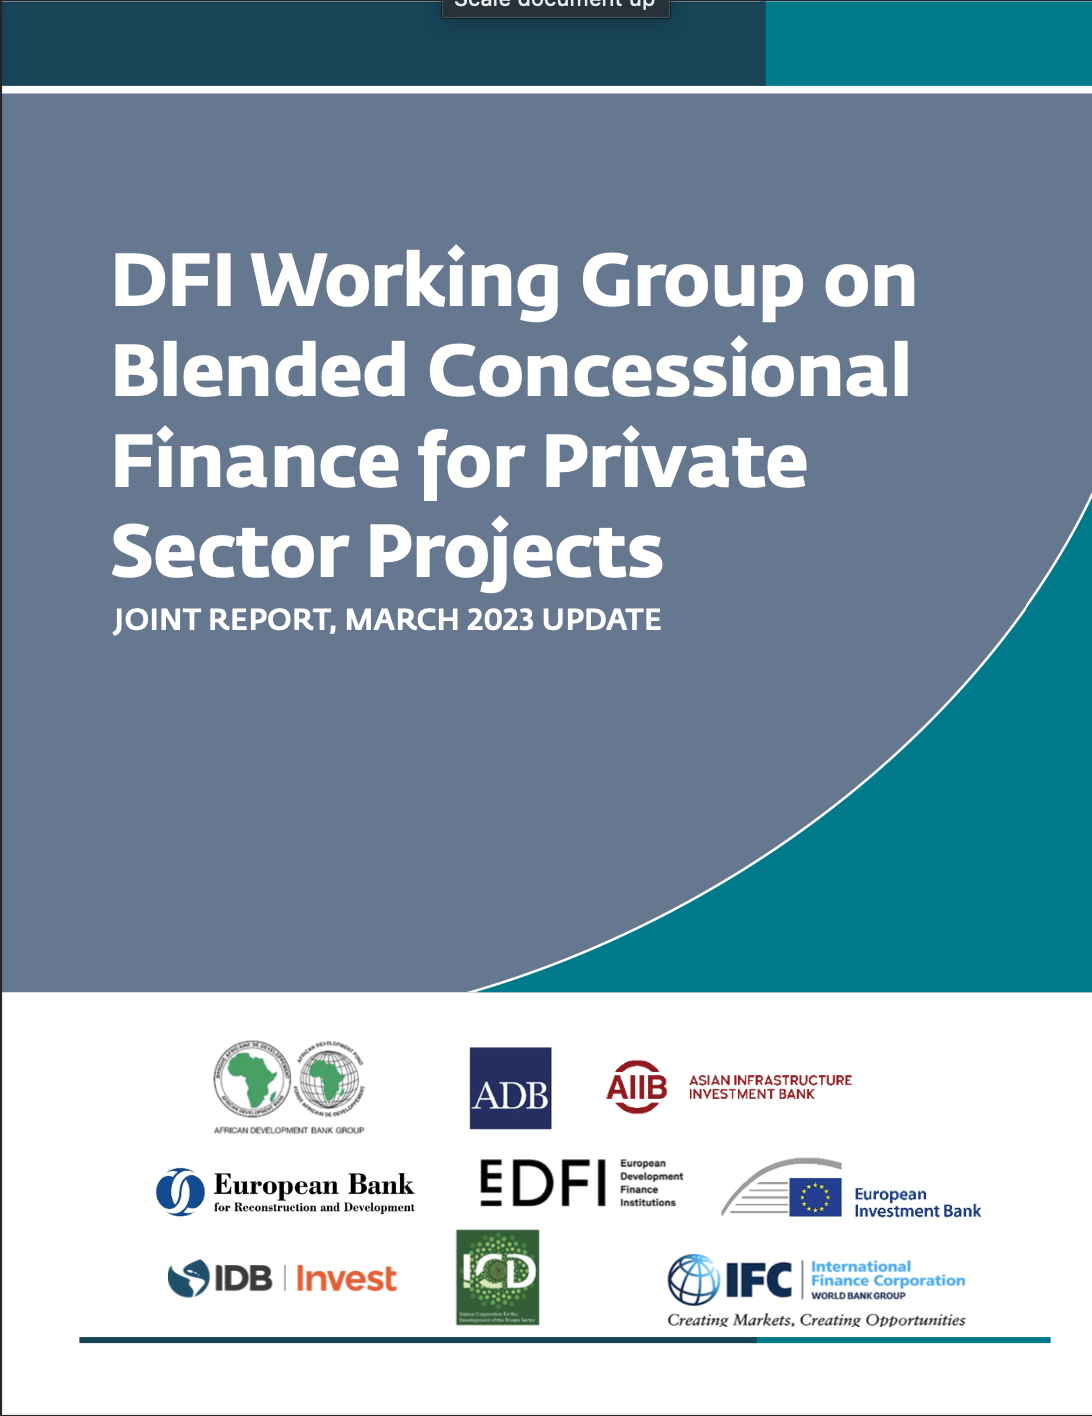 DFI Working Group on Blended Concessional Finance for Private Sector Projects Joint Report 2023